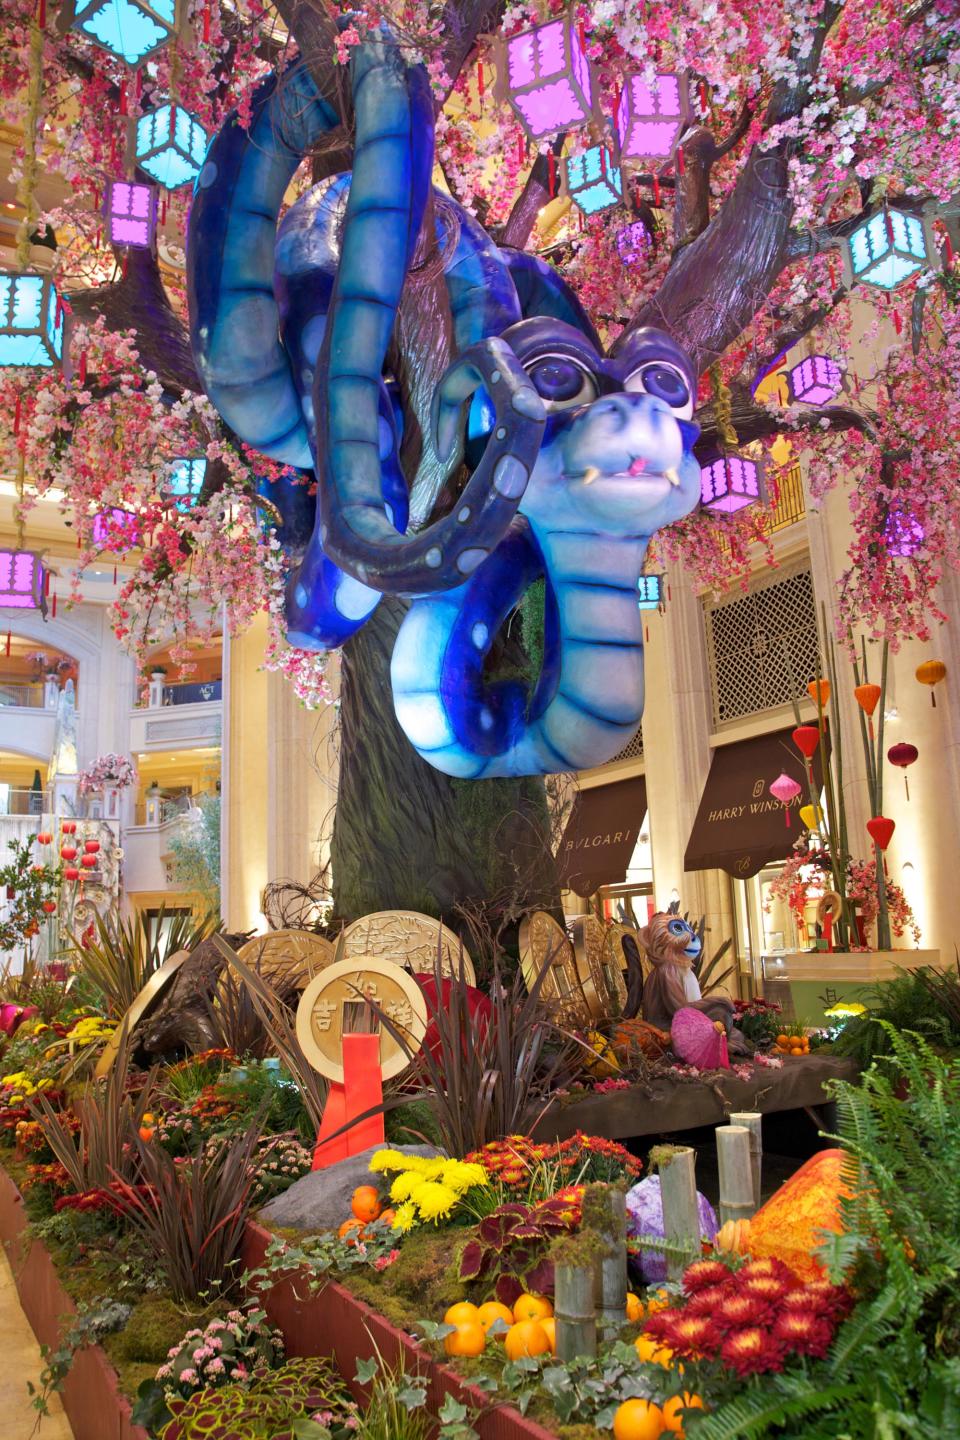 This January 2013 photo provided by The Venetian in Las Vegas shows a Chinese New Year art installation welcoming the year of the snake in the waterfall atrium connecting The Venetian and The Palazzo resorts. The display features an animatronic snake coiled in a tree decorated with flowers, lanterns and coins. Las Vegas celebrates Chinese New Year in a big way with feasts, exhibits, performances and other events around the city. The year of the snake begins Feb. 10. (AP Photo/The Venetian, Audrey Dempsey)